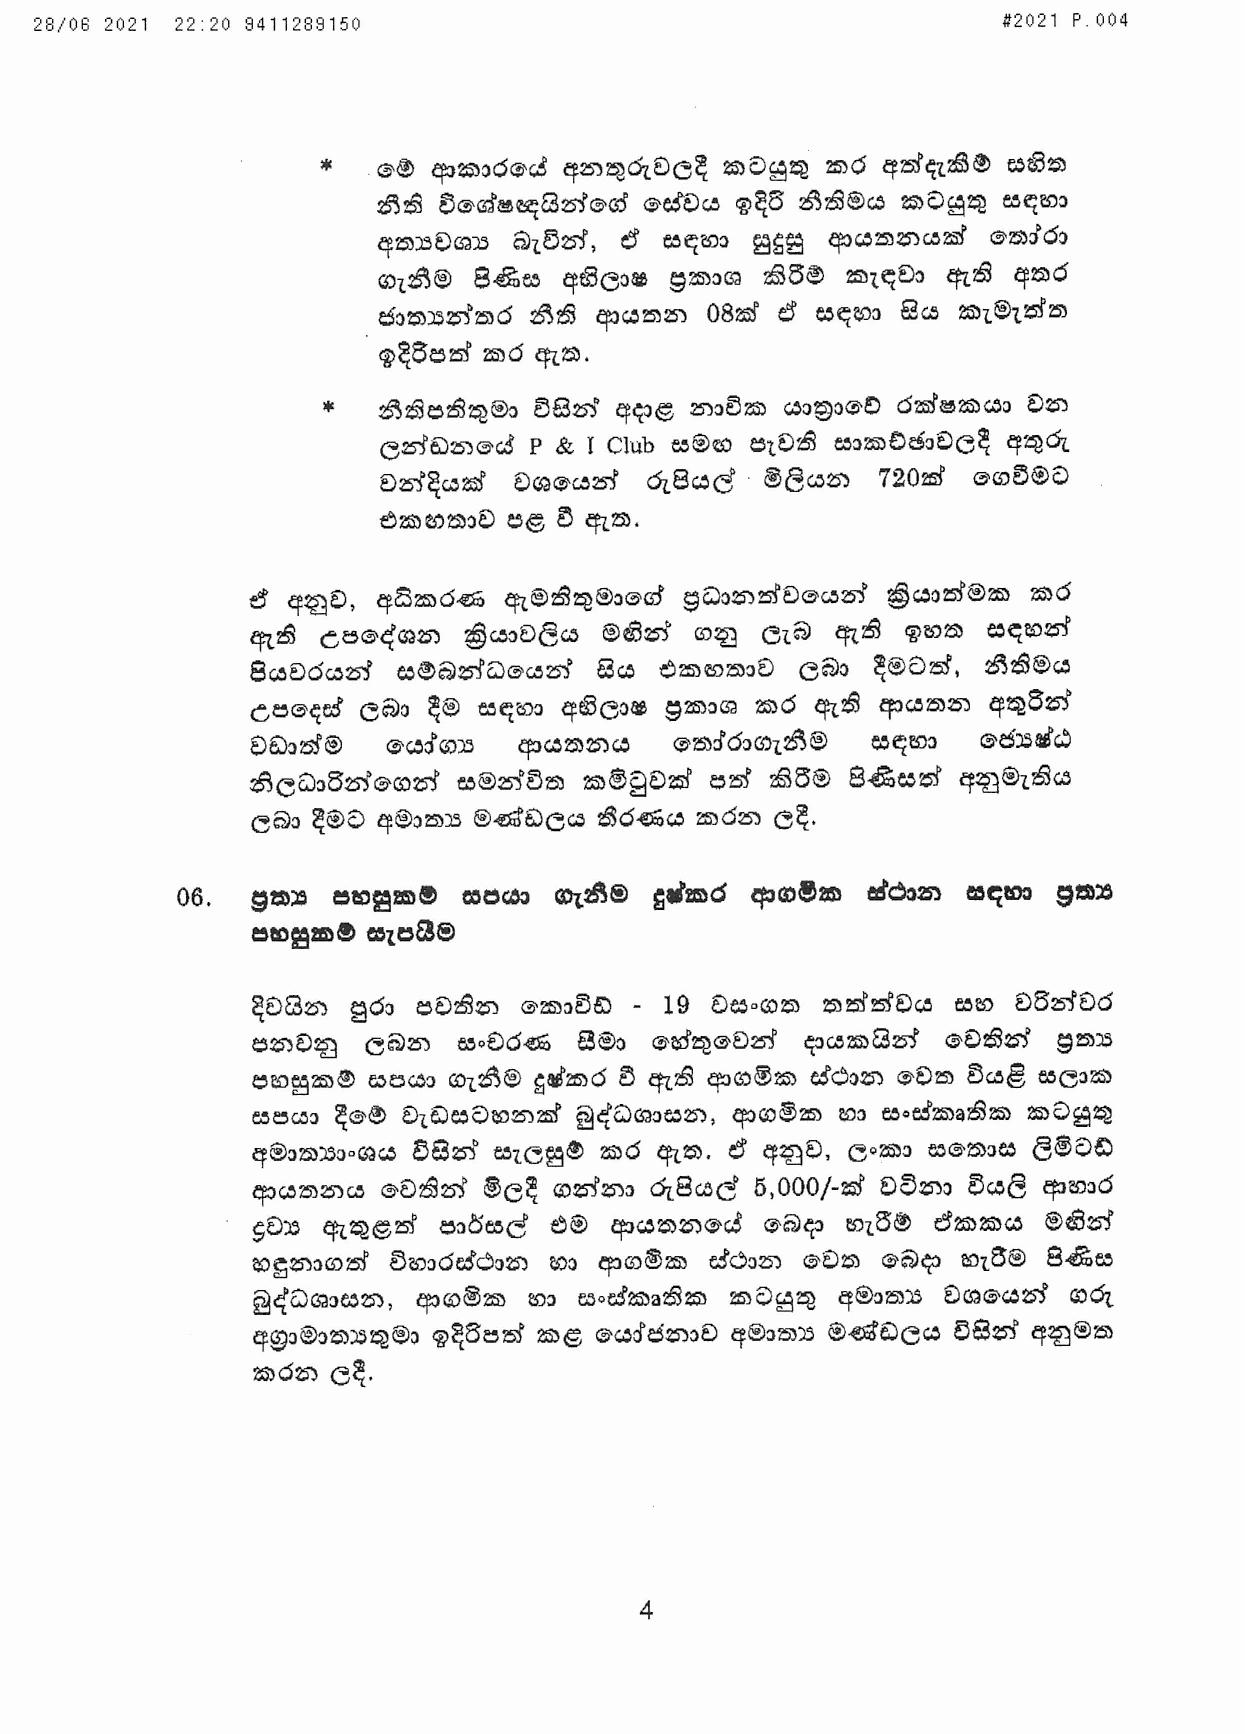 Cabinet Decision on 28.06.2021 page 004